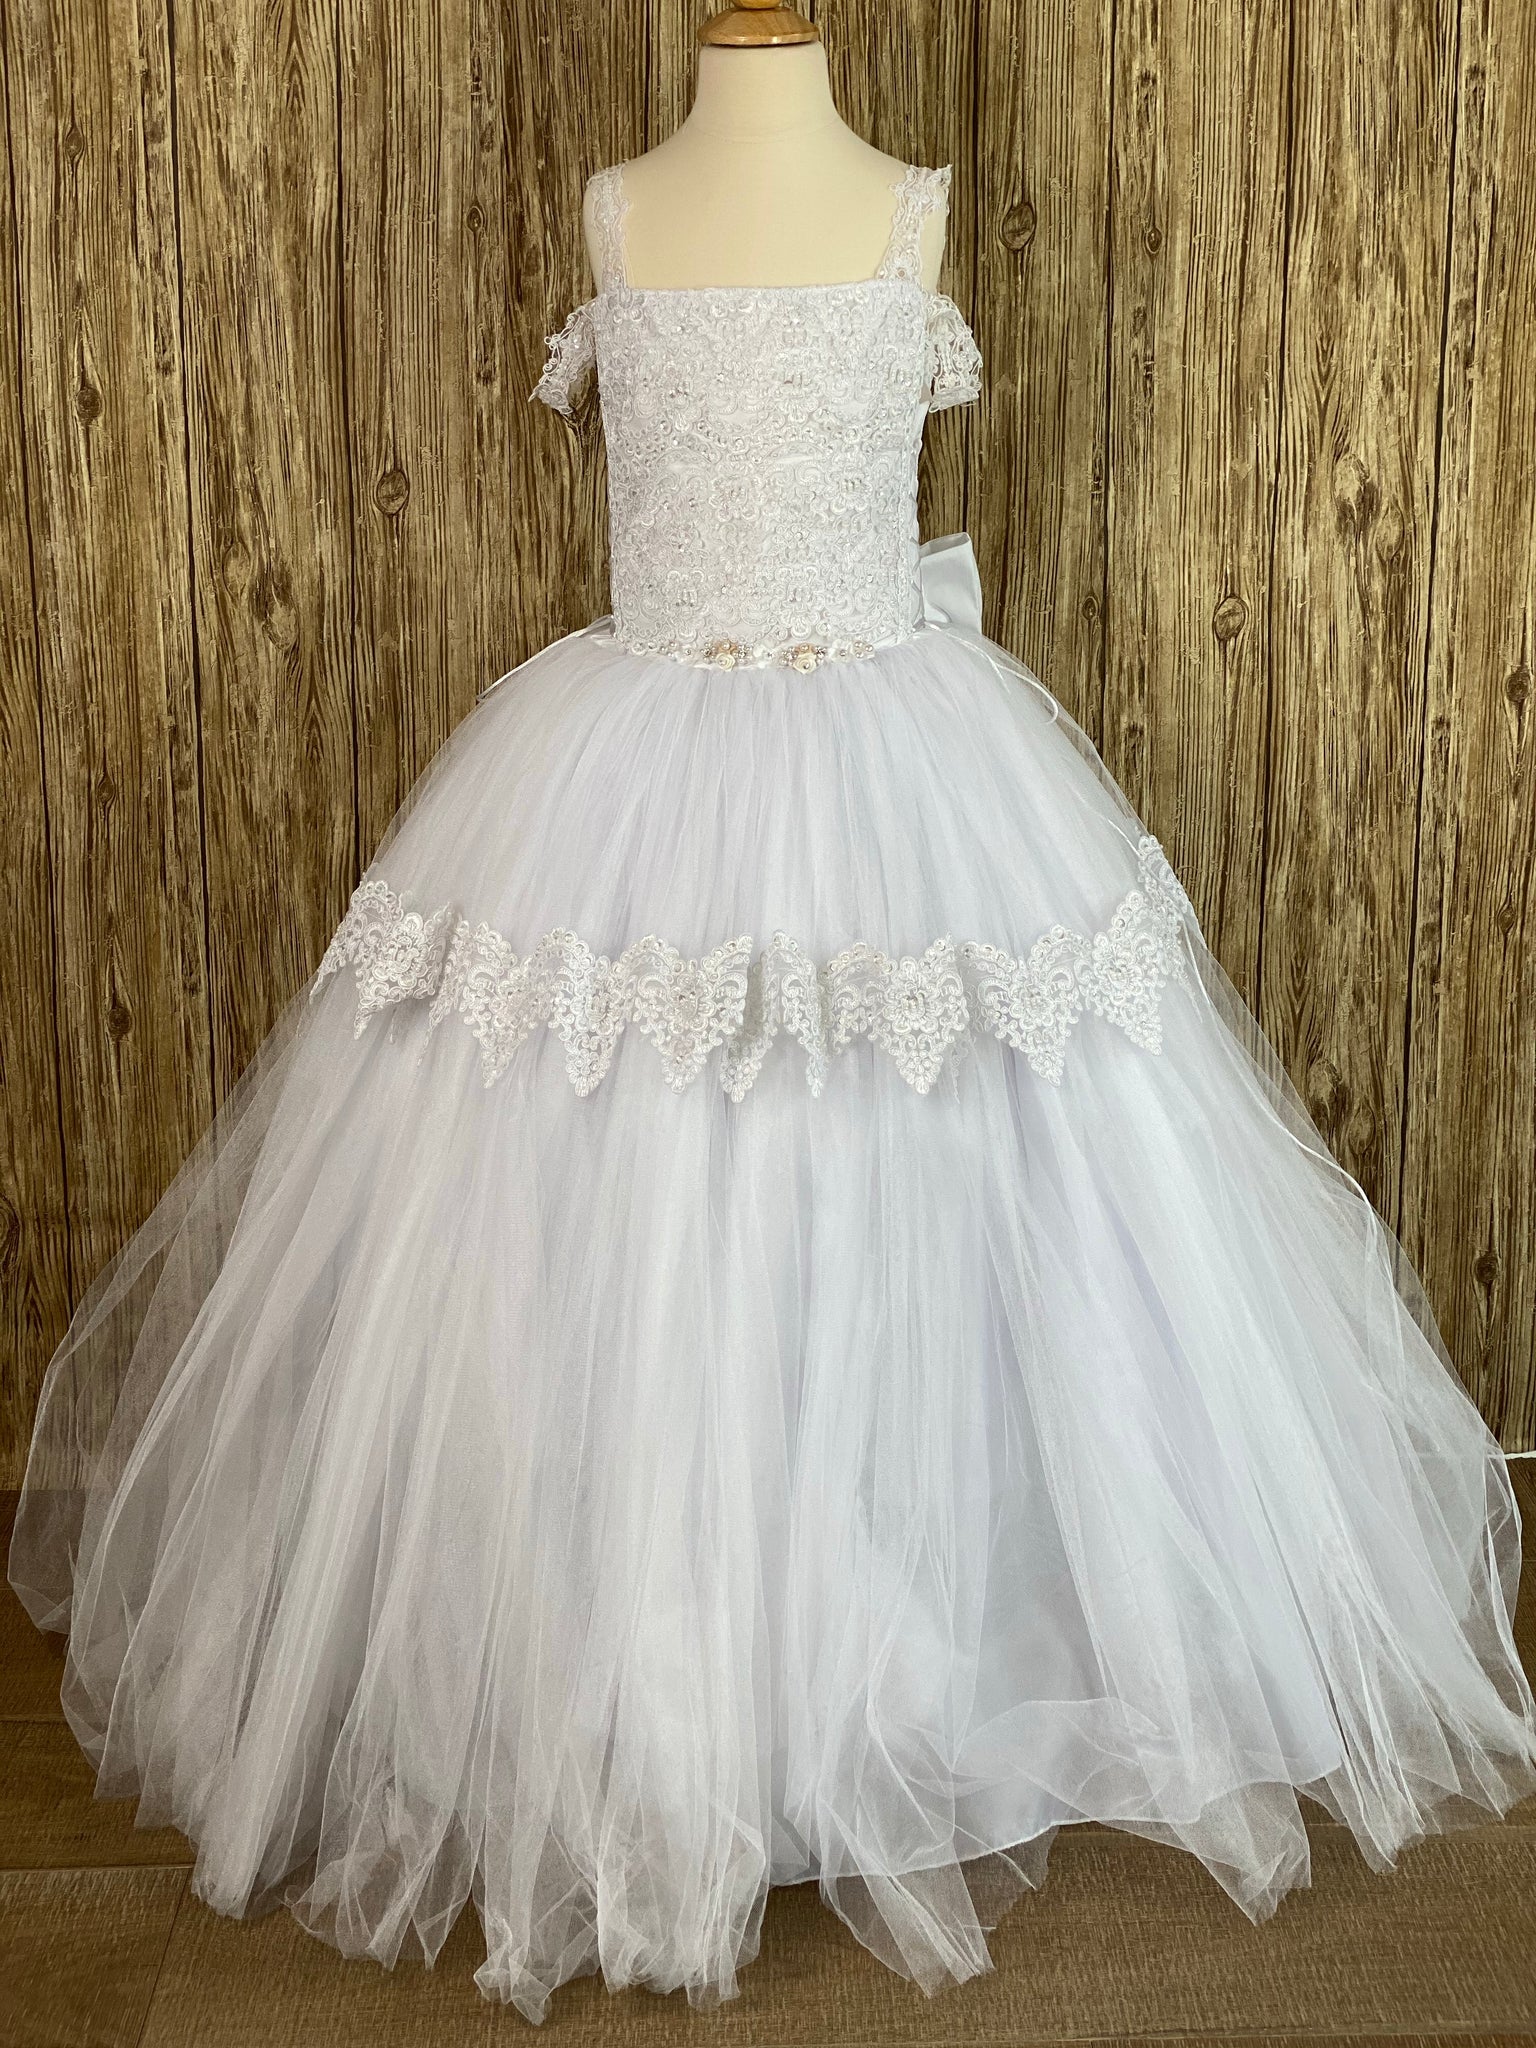 White, size 12 Squared neck Lace embroidered bodice Pearl, rhinestone, and rose thin band along bottom of bodice Layered tulle skirt with embroidered trim on top layer Button closure Big satin bow on back